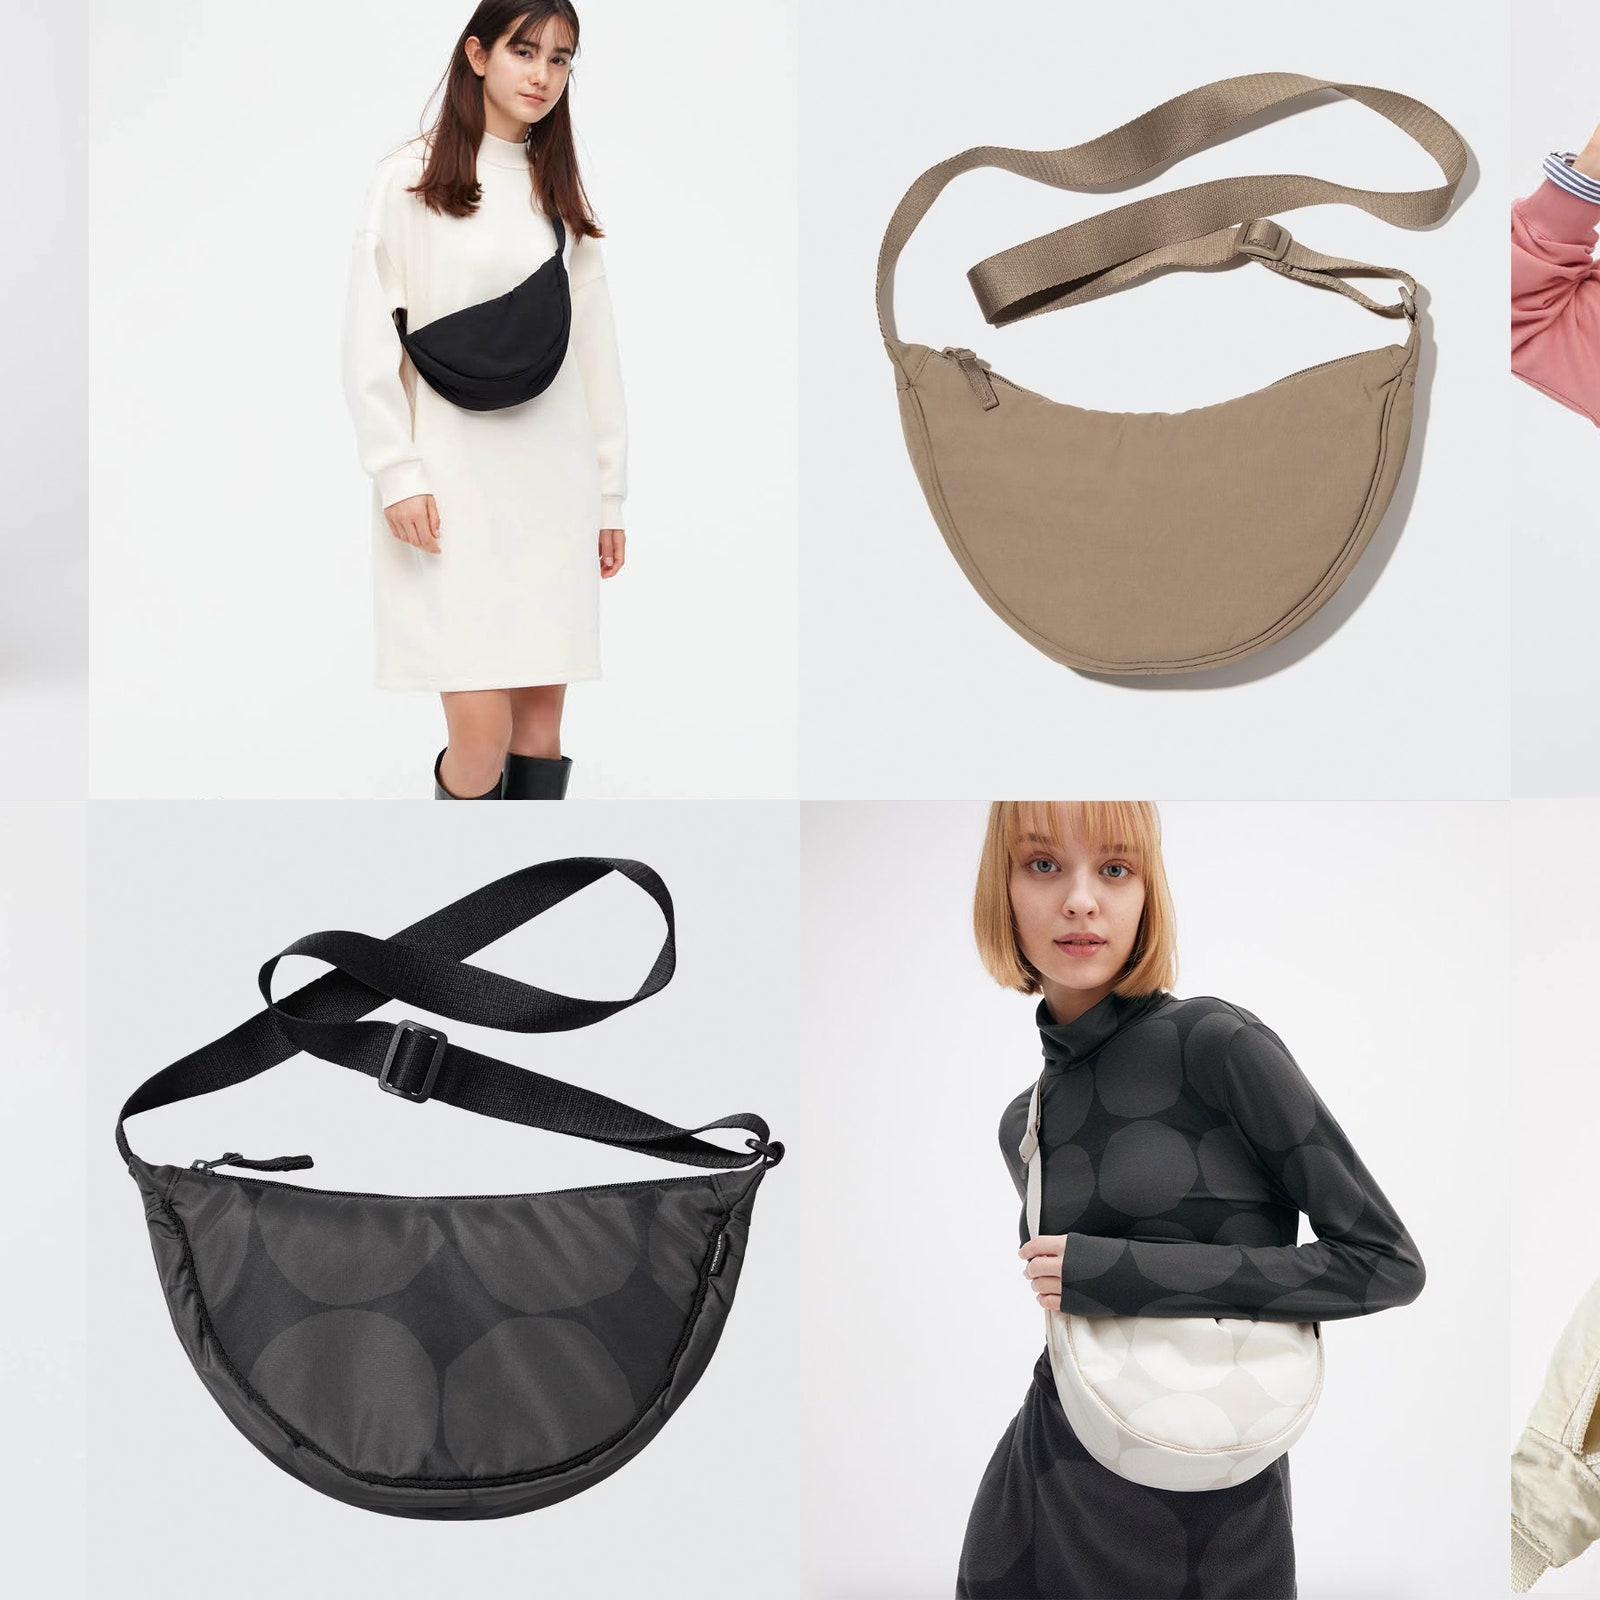 Is Uniqlo’s Viral $20 Shoulder Bag Really Worth the Hype?